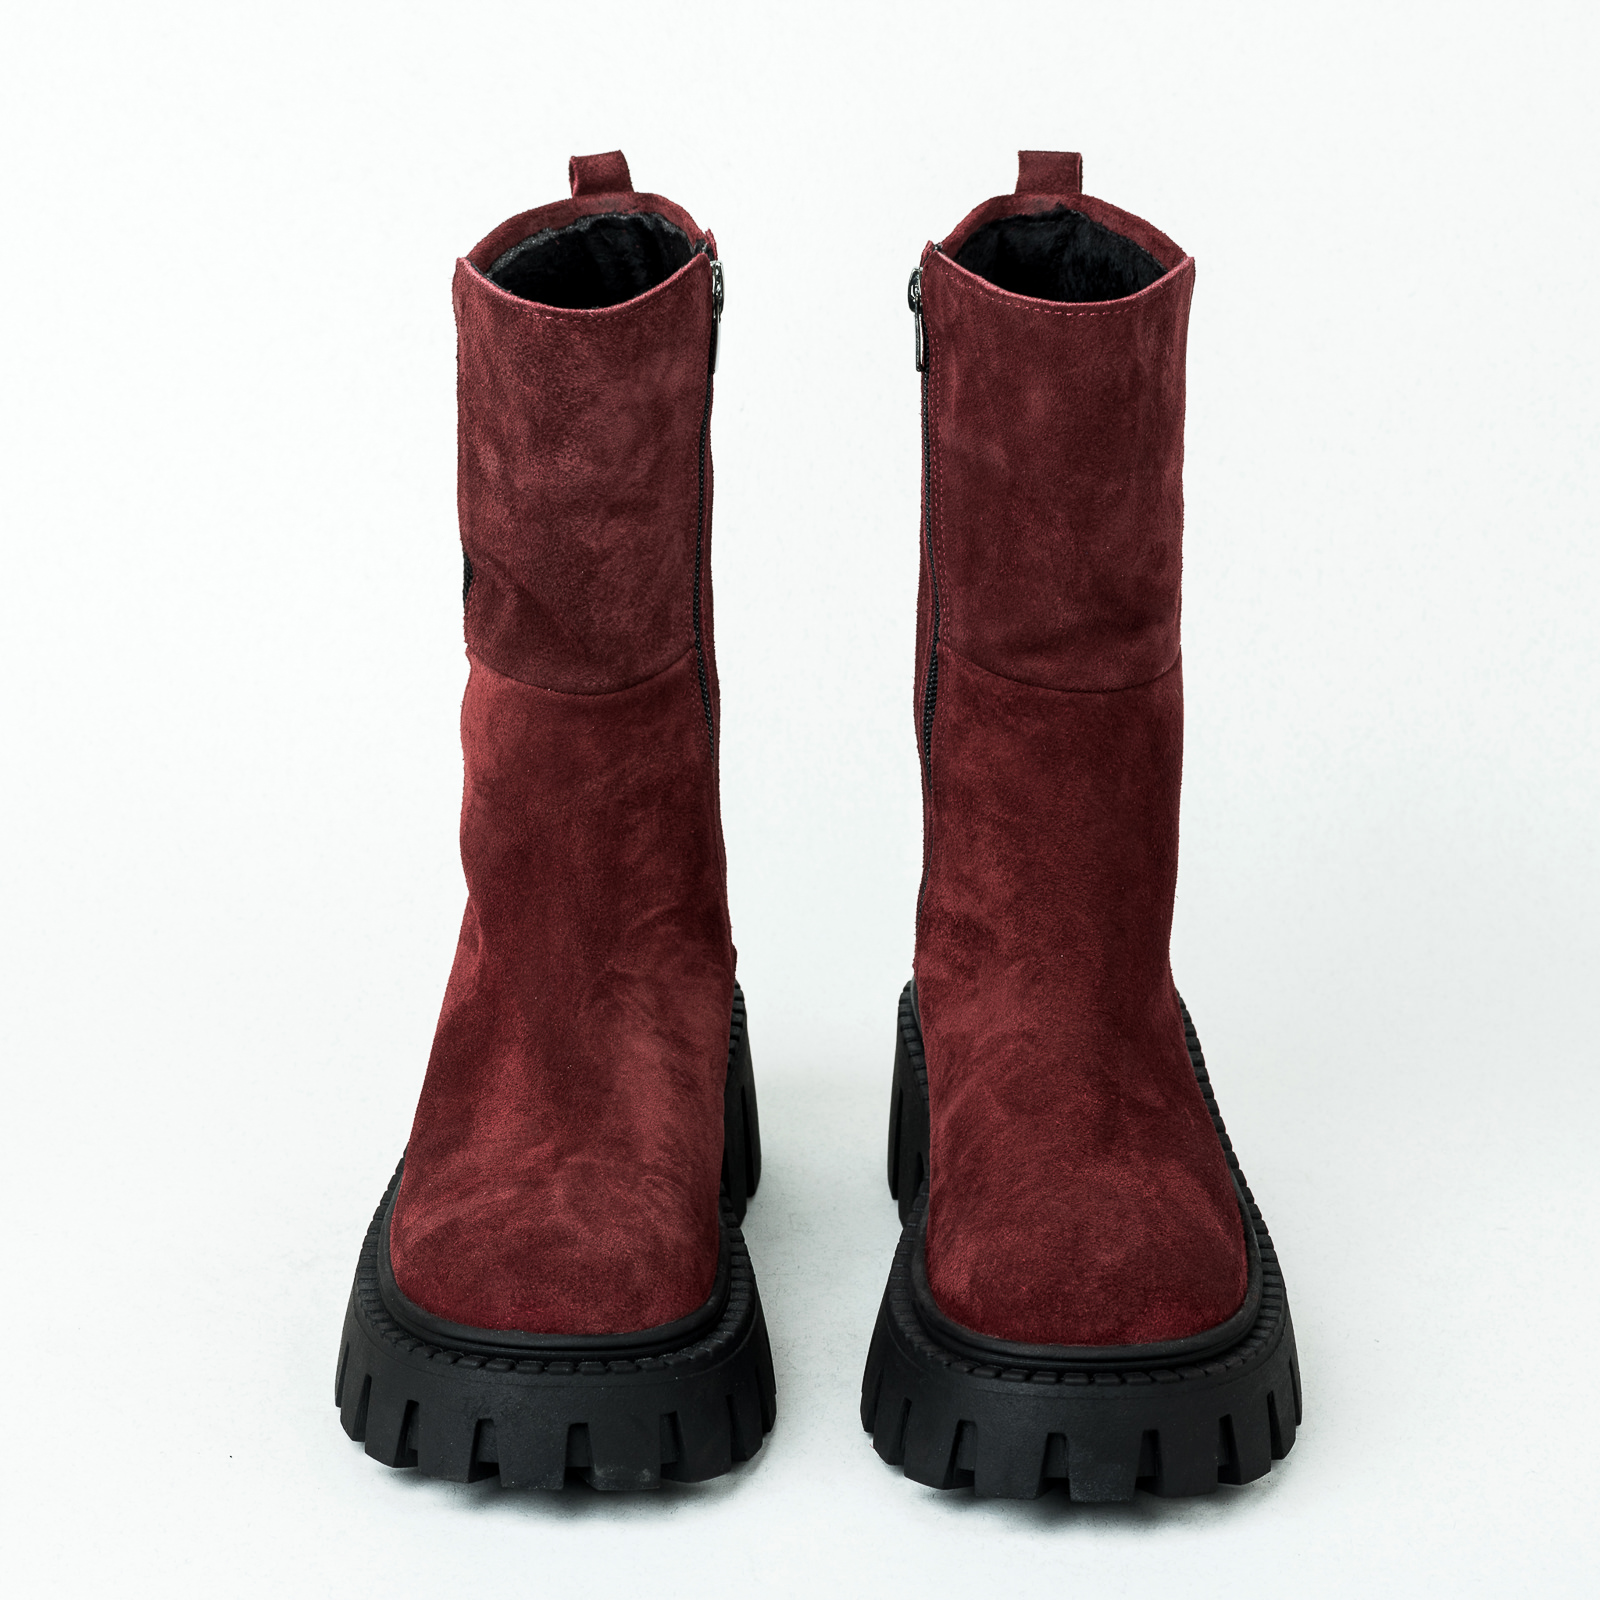 Leather booties B247 - WINE RED